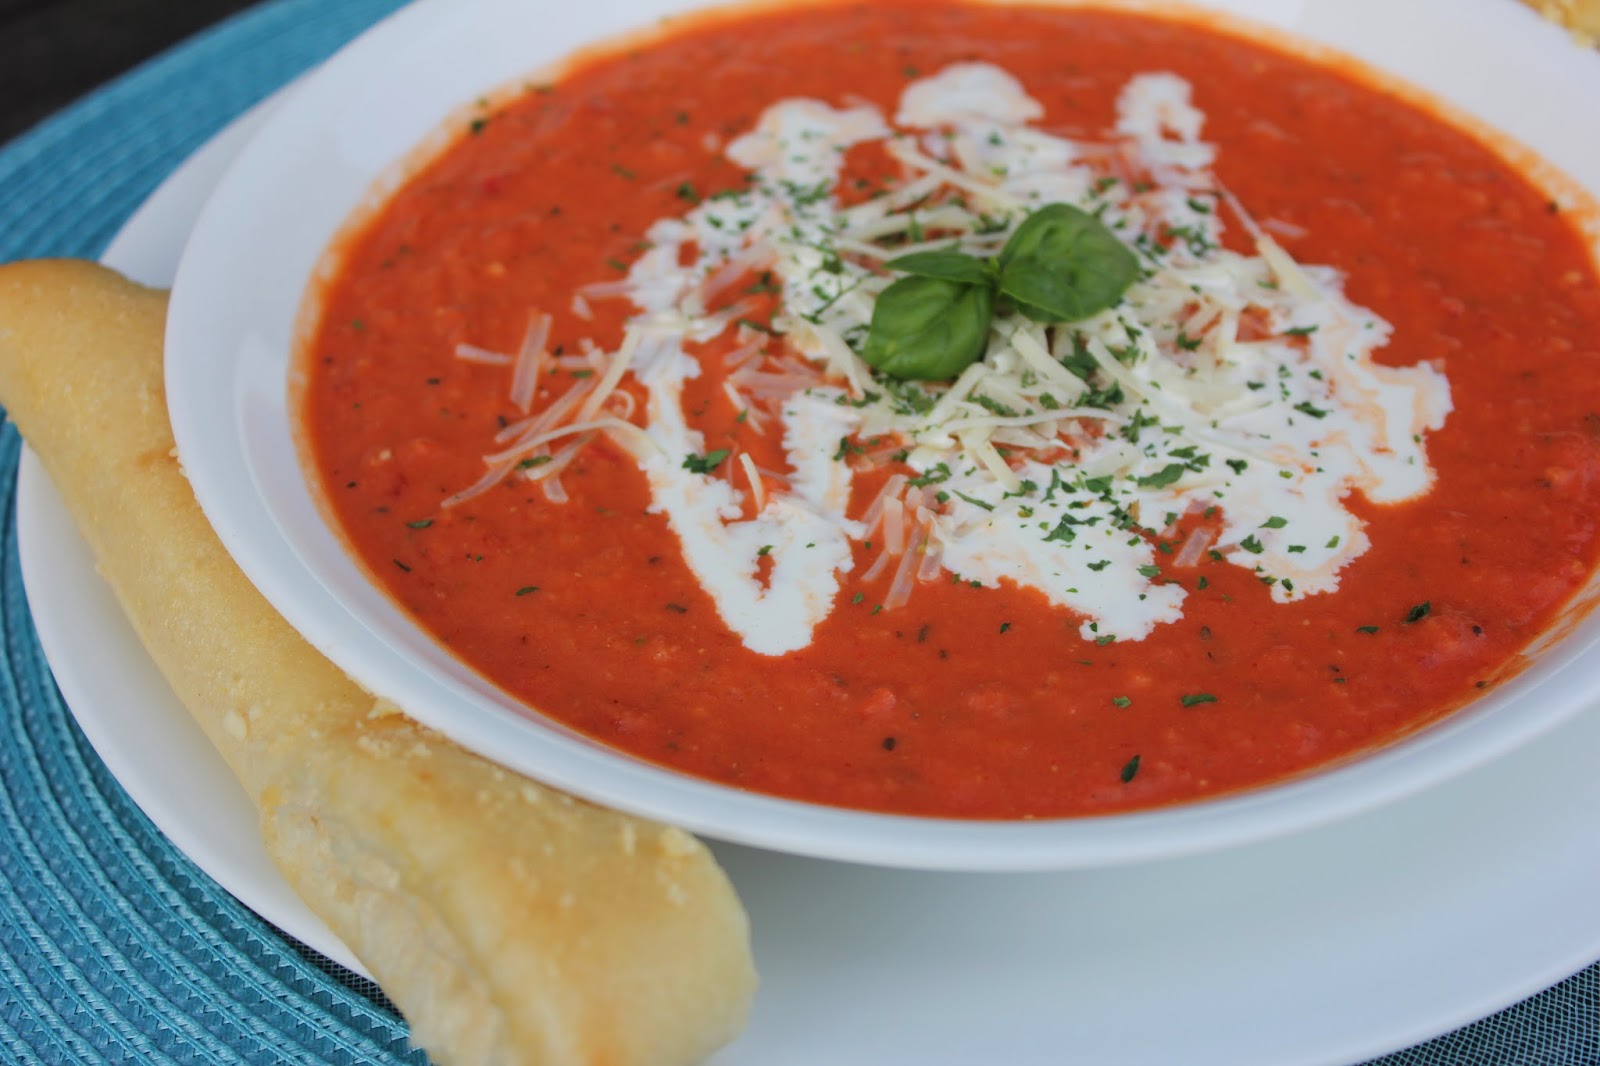 Recipe: Soup, Recipe: Side Dishes, Recipe: Vegetable, Traditional Creamy Tomato Basil Soup, Deals to Meals, best creamy tomato basil soup